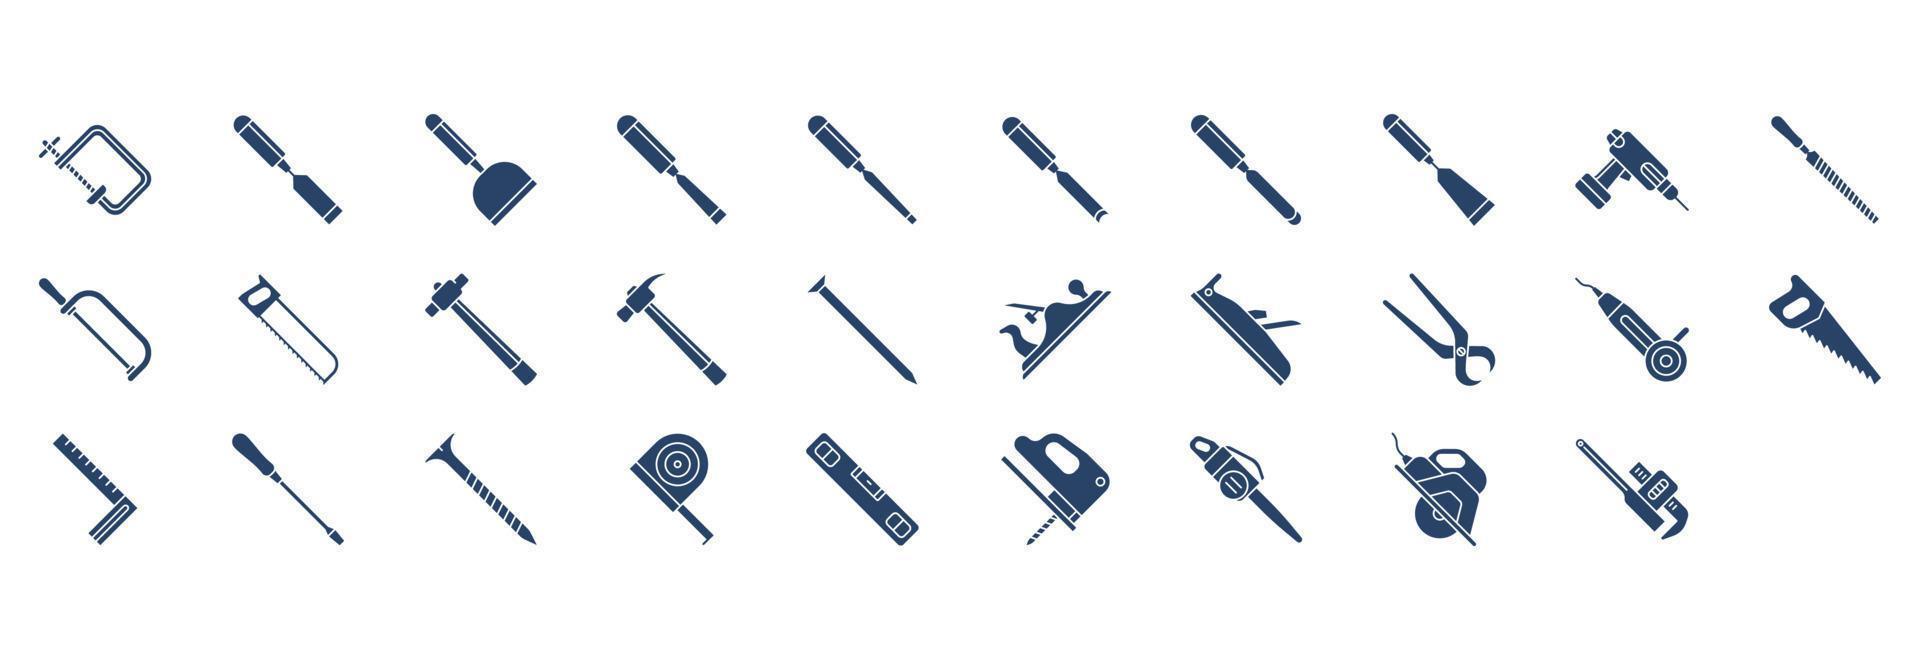 Collection of icons related to Carpentry tools, including icons like Clipper, Cutting tool, File and more. vector illustrations, Pixel Perfect set